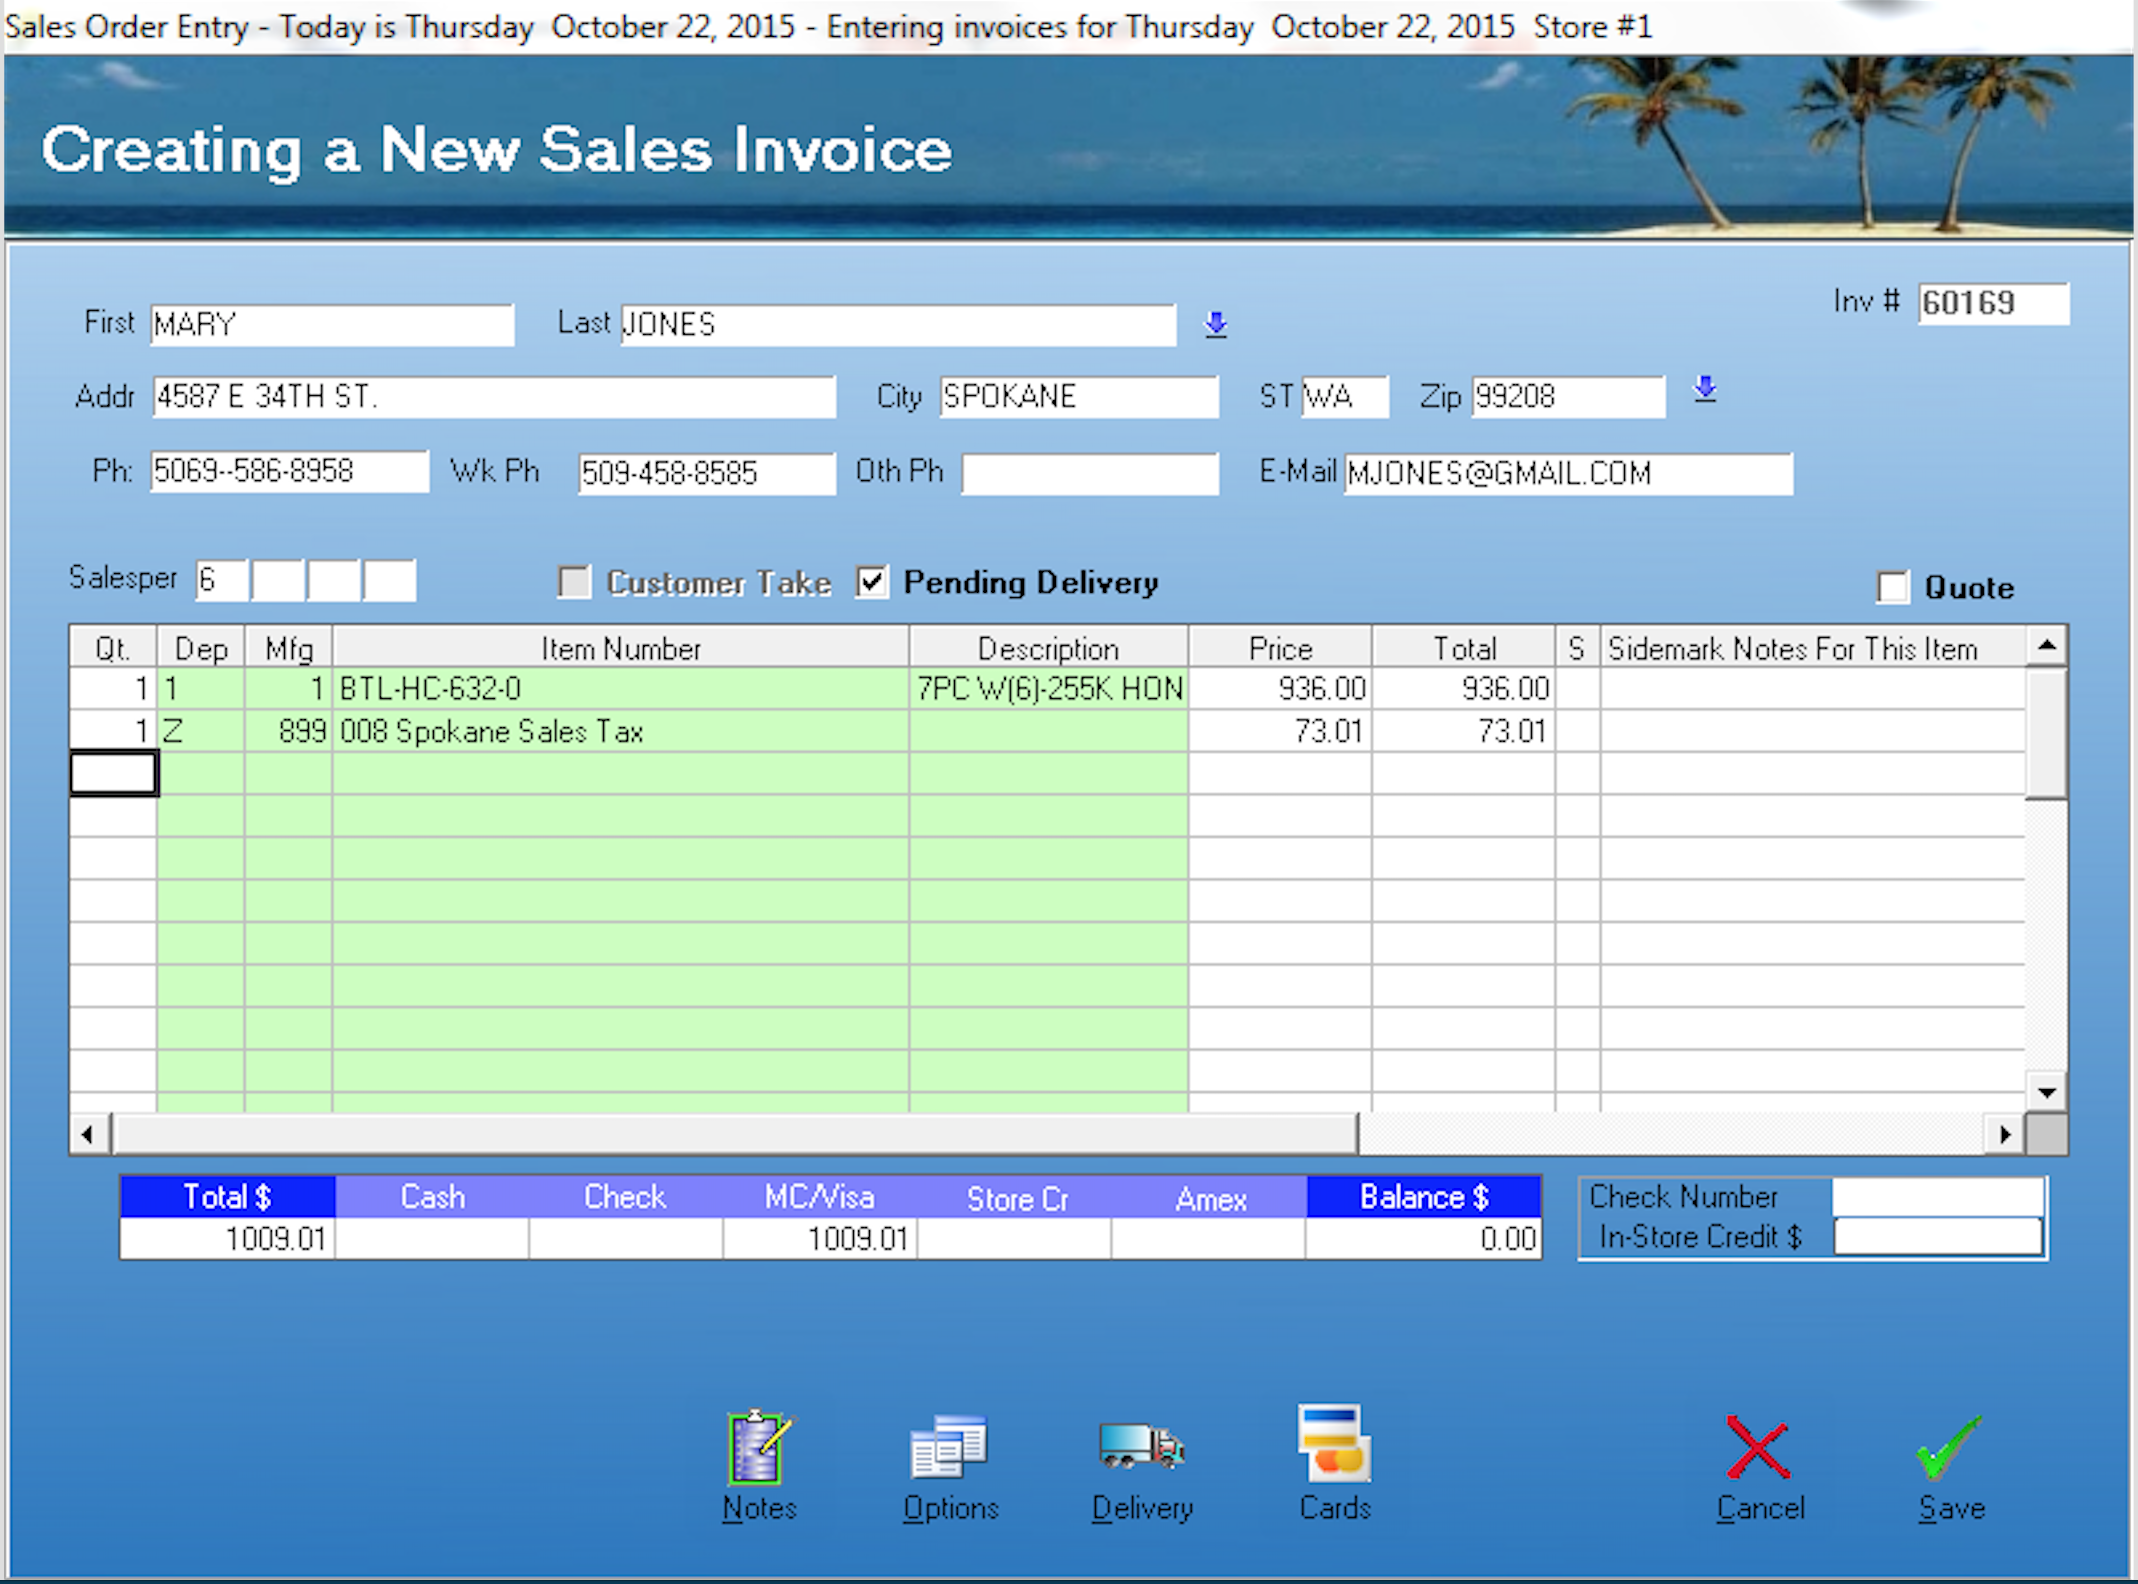 Sales invoice entry screen